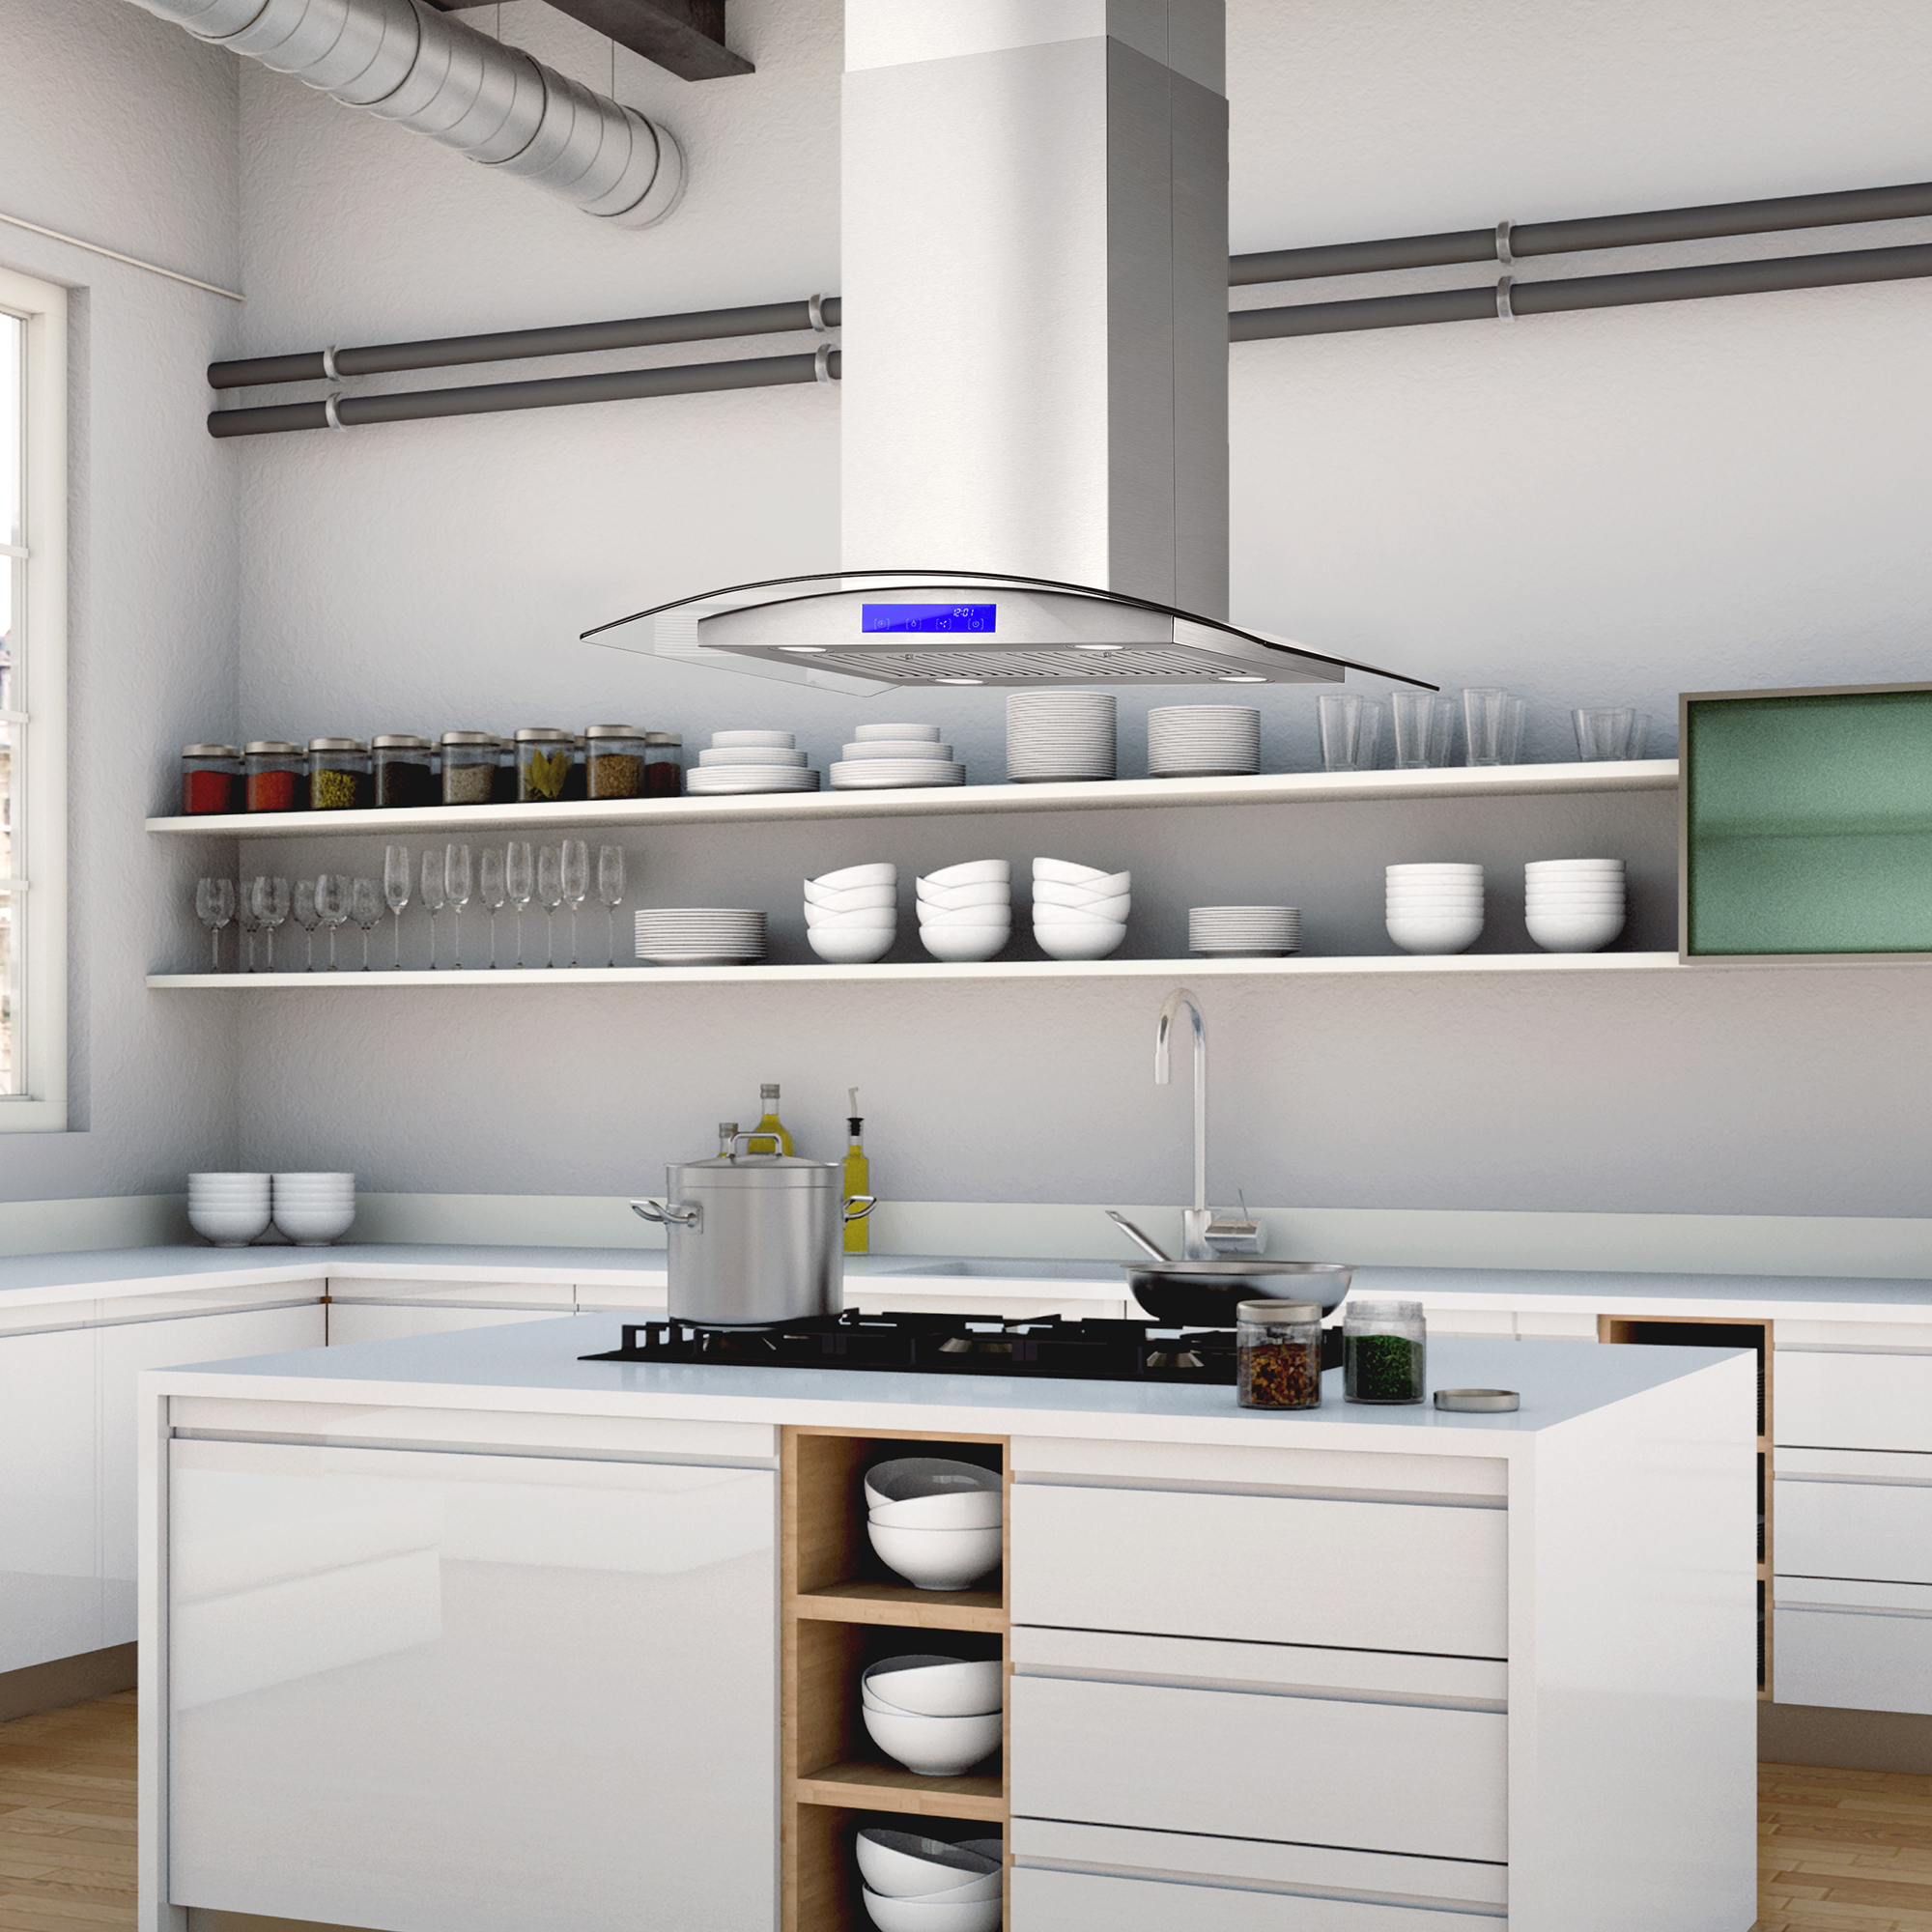 White modern kitchen in a house with a beautiful design